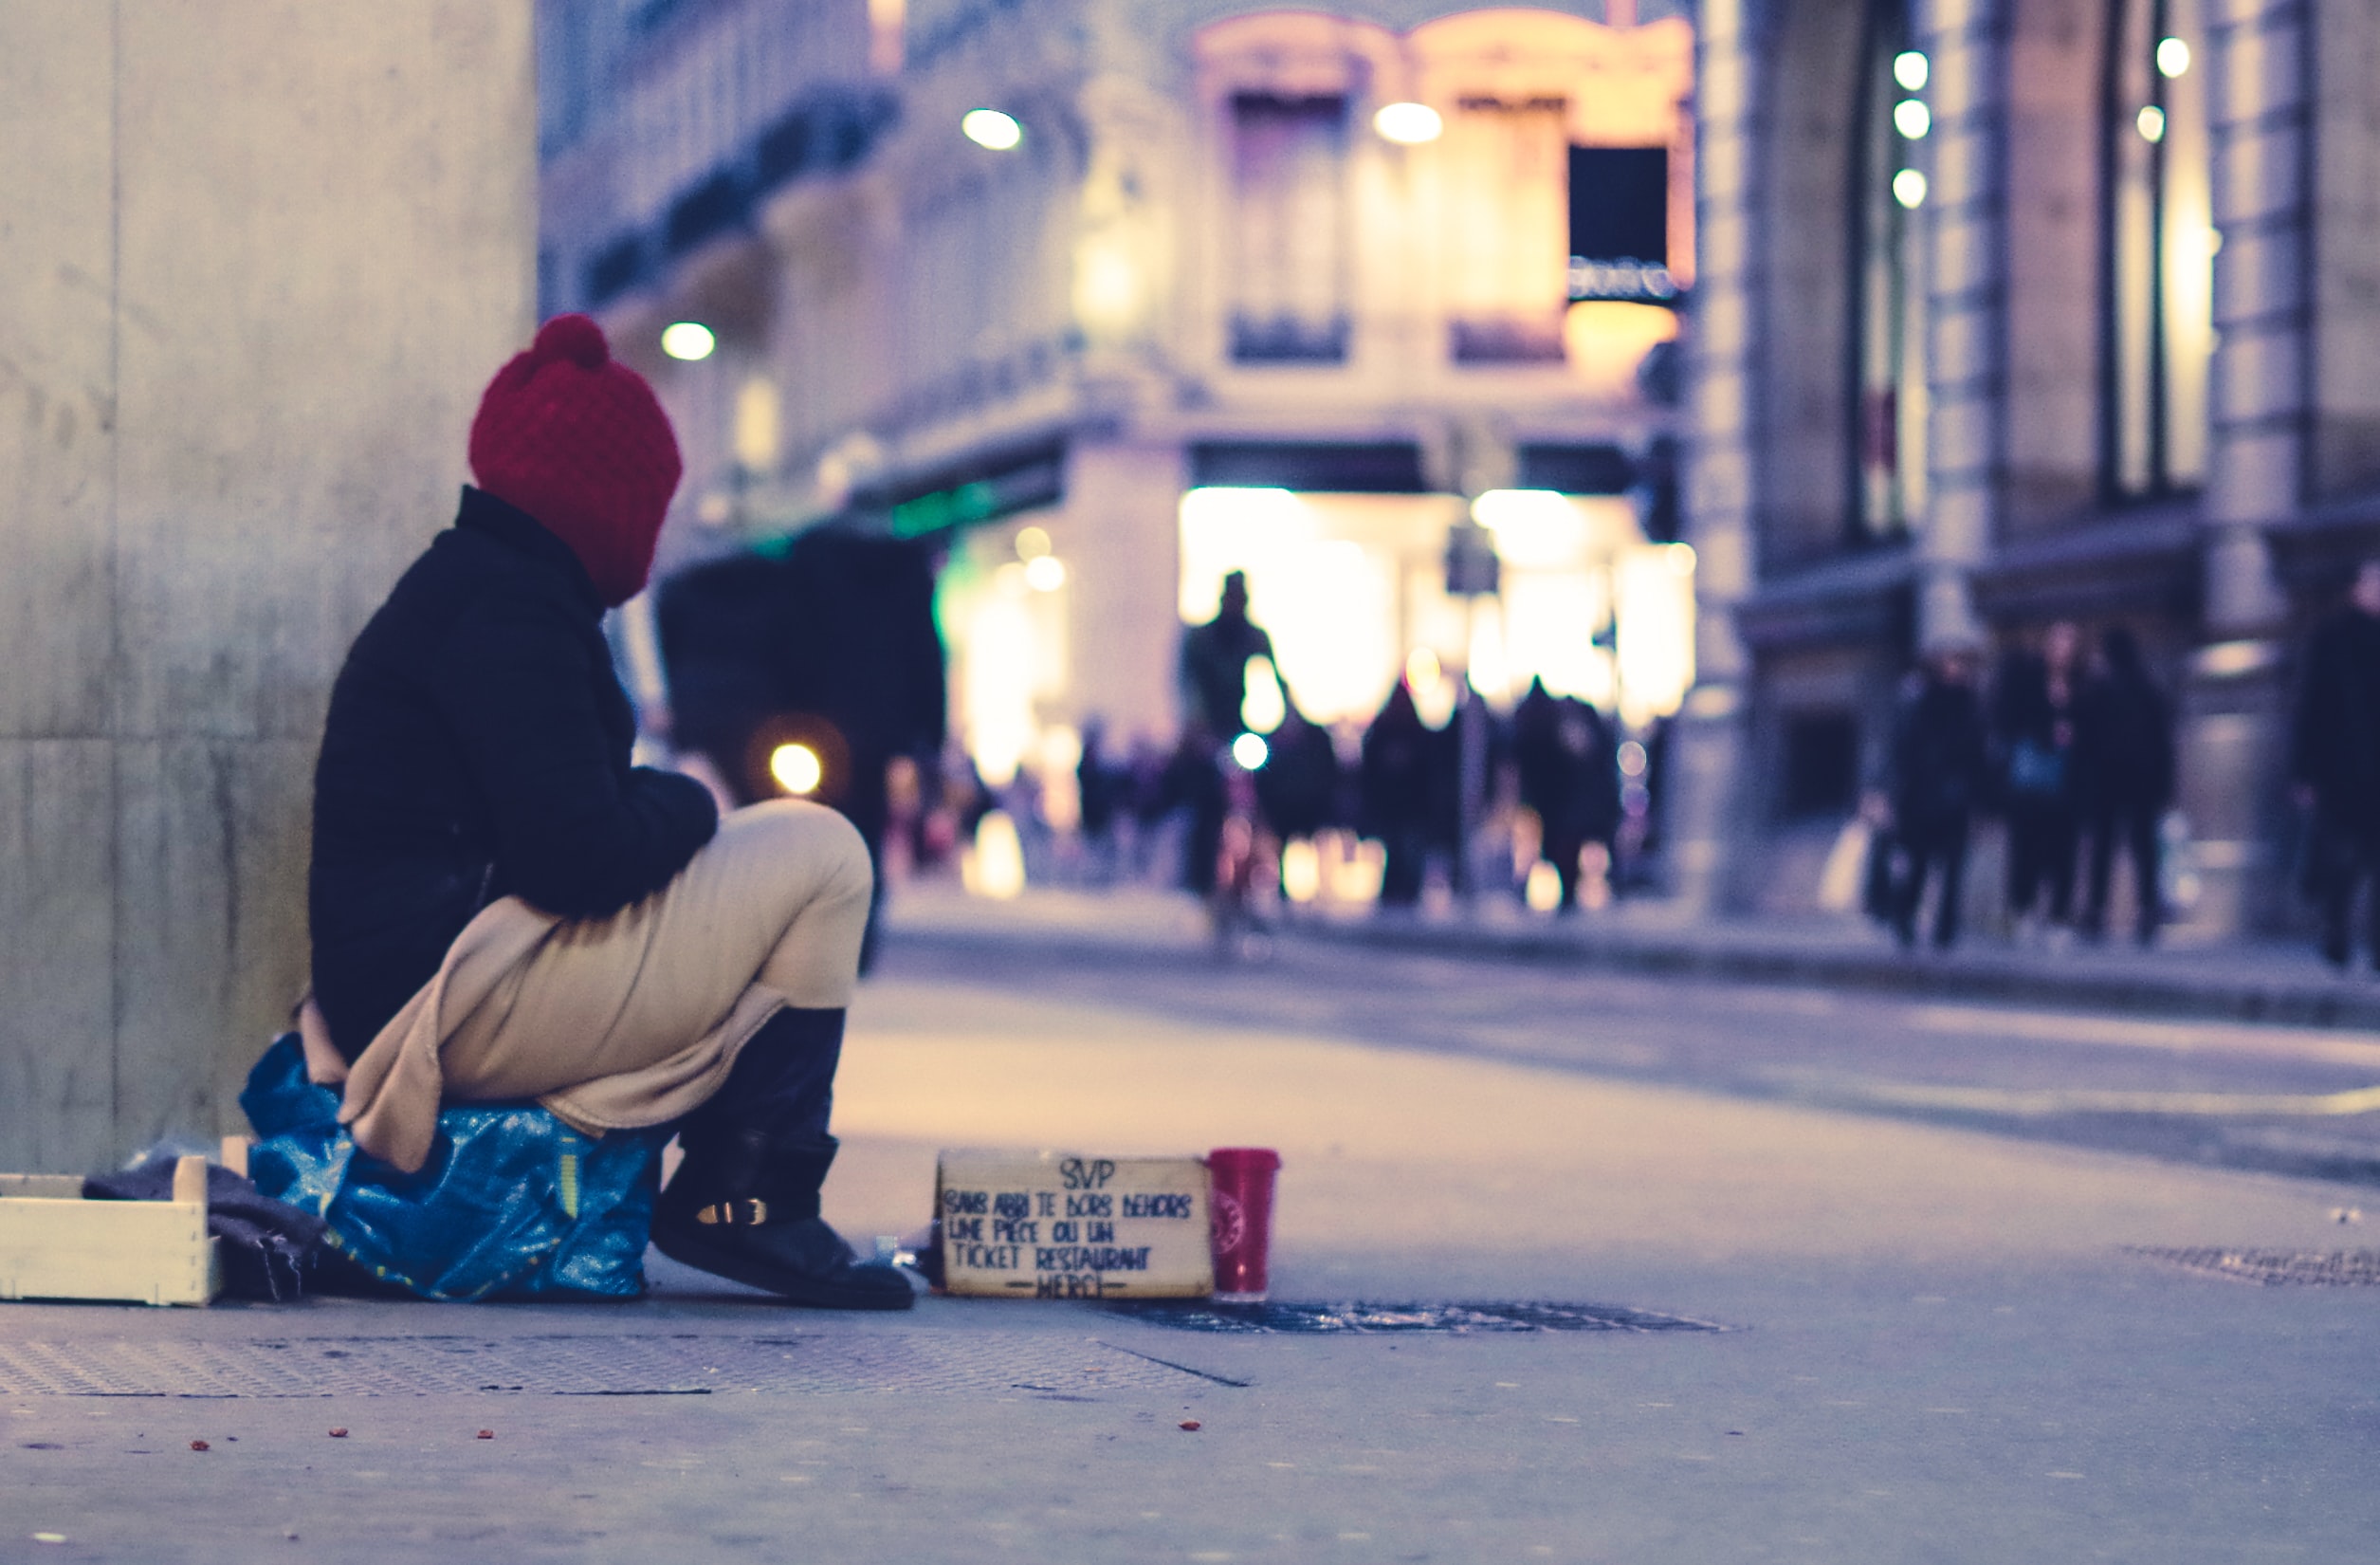 A young person homeless on the street